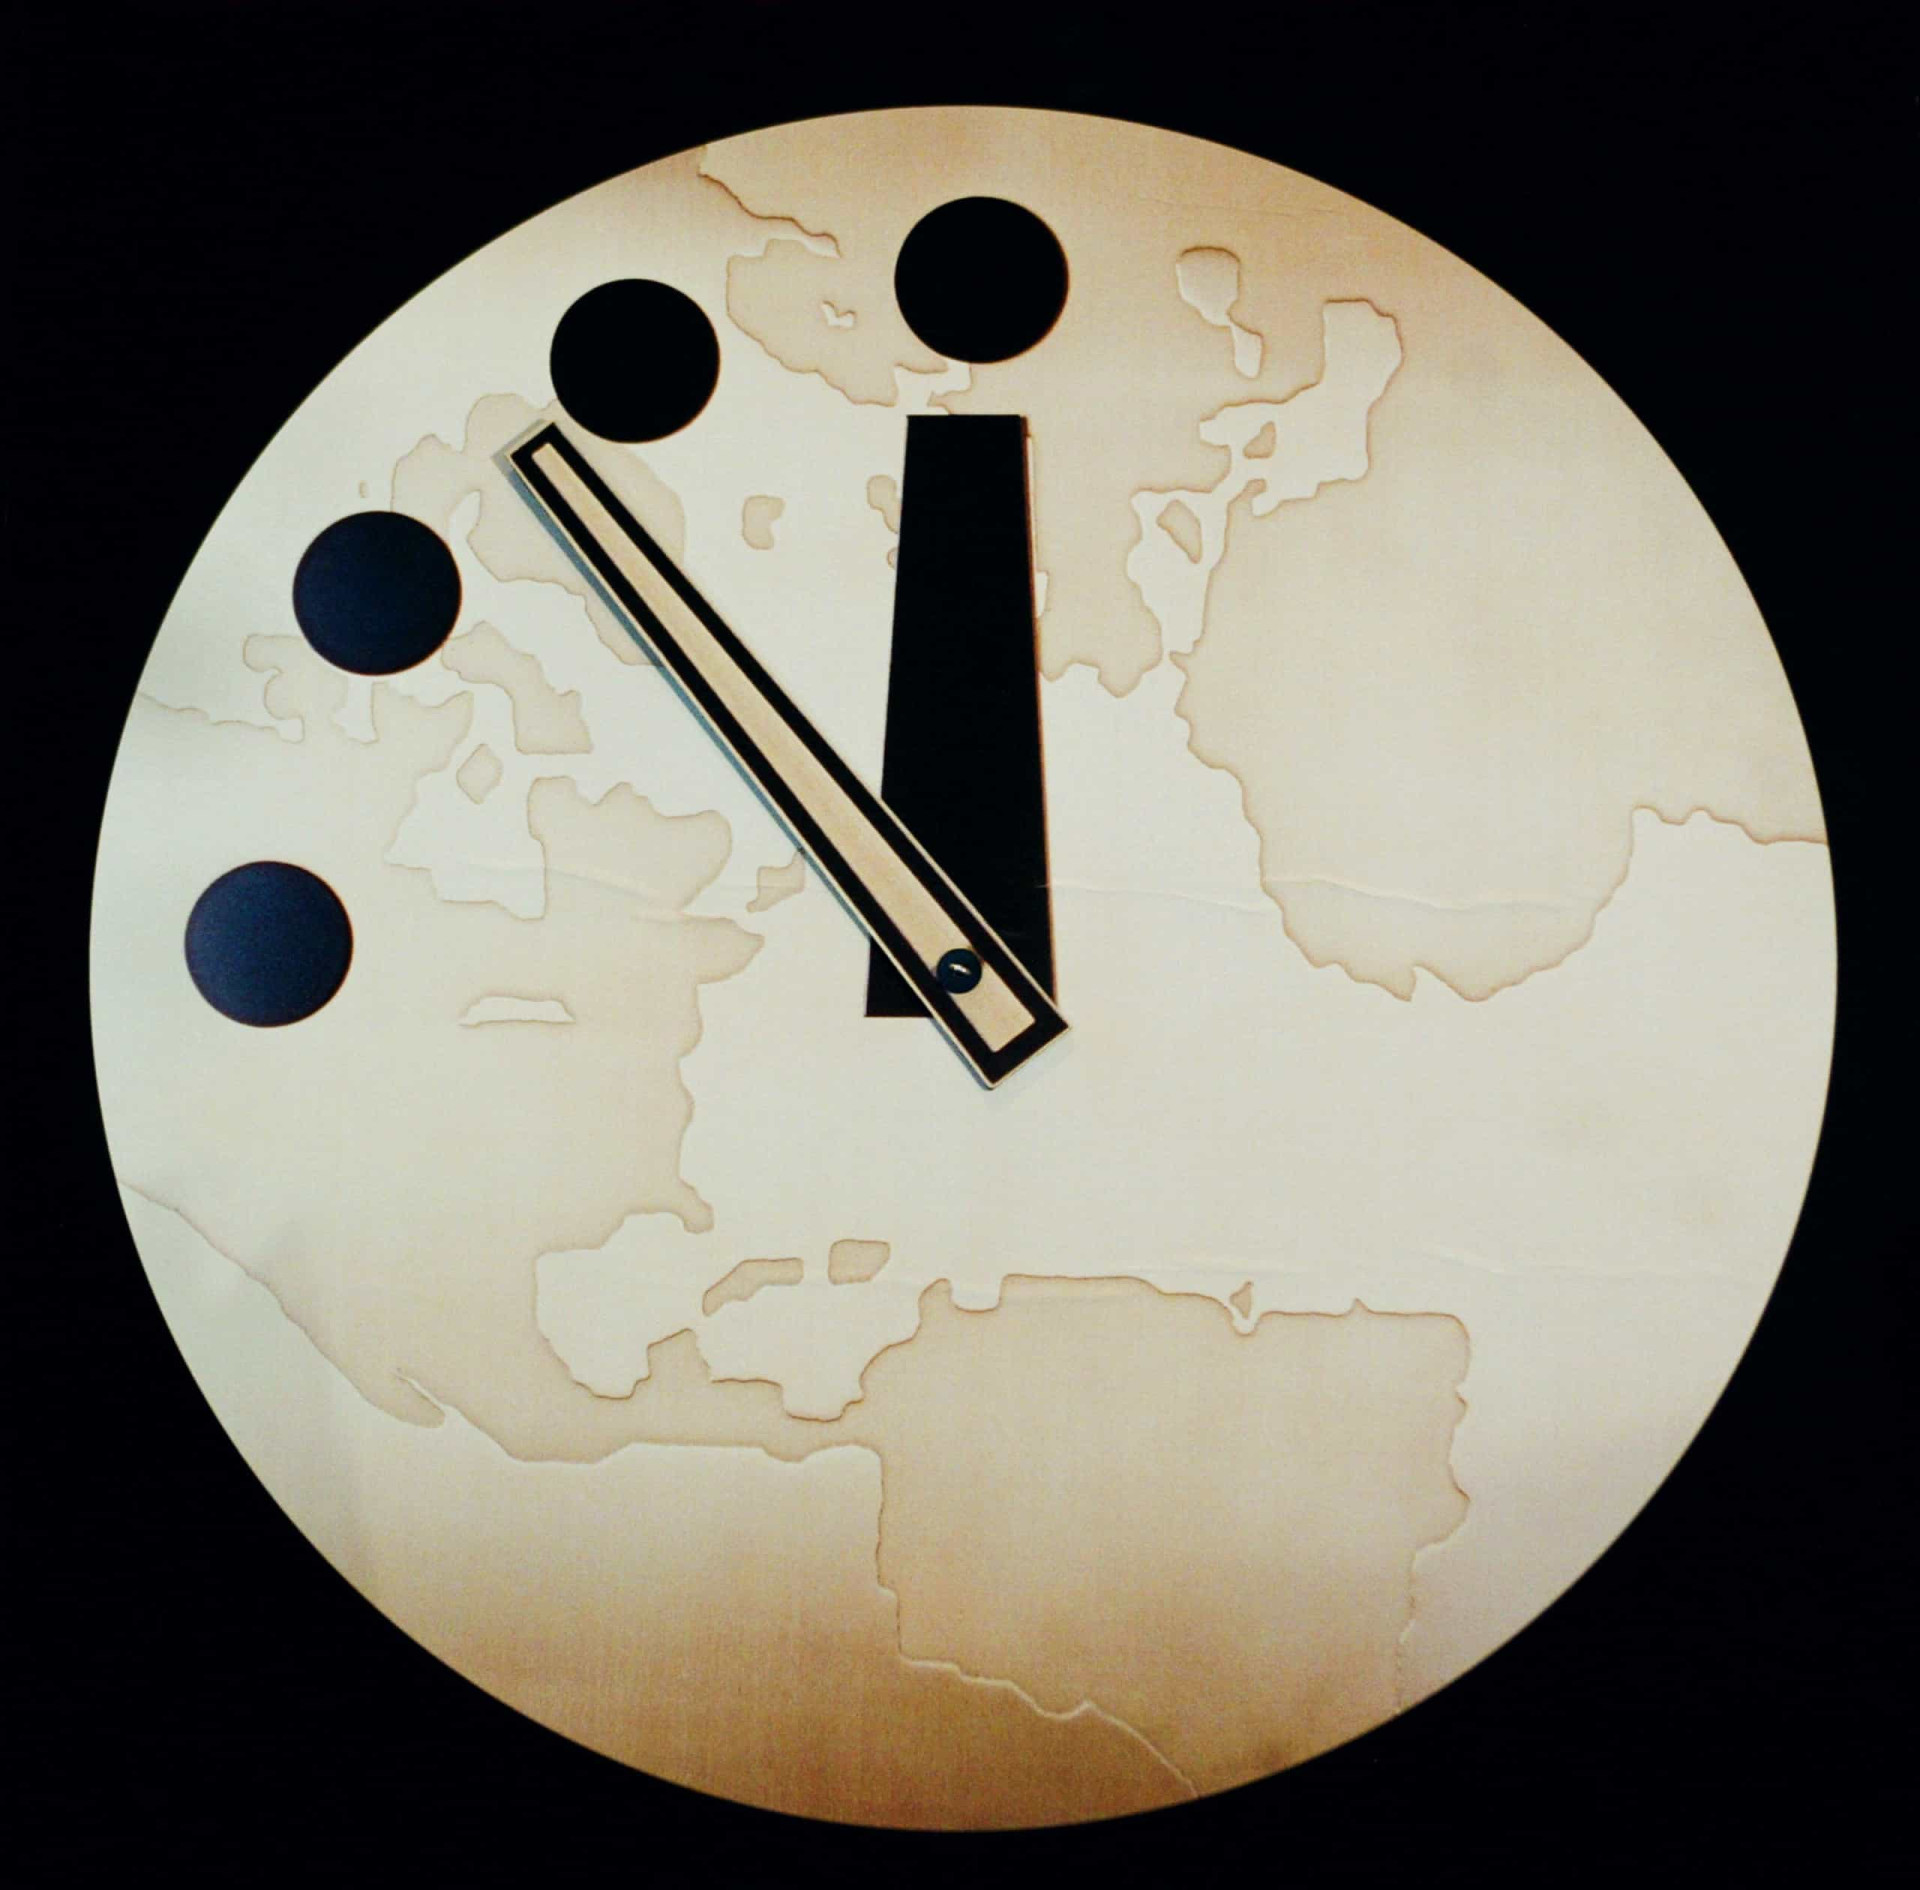 <p>The Doomsday Clock is a symbol that represents the likelihood of a man-made global catastrophe.</p><p><a href="https://www.msn.com/en-au/community/channel/vid-7xx8mnucu55yw63we9va2gwr7uihbxwc68fxqp25x6tg4ftibpra?cvid=94631541bc0f4f89bfd59158d696ad7e">Follow us and access great exclusive content every day</a></p>